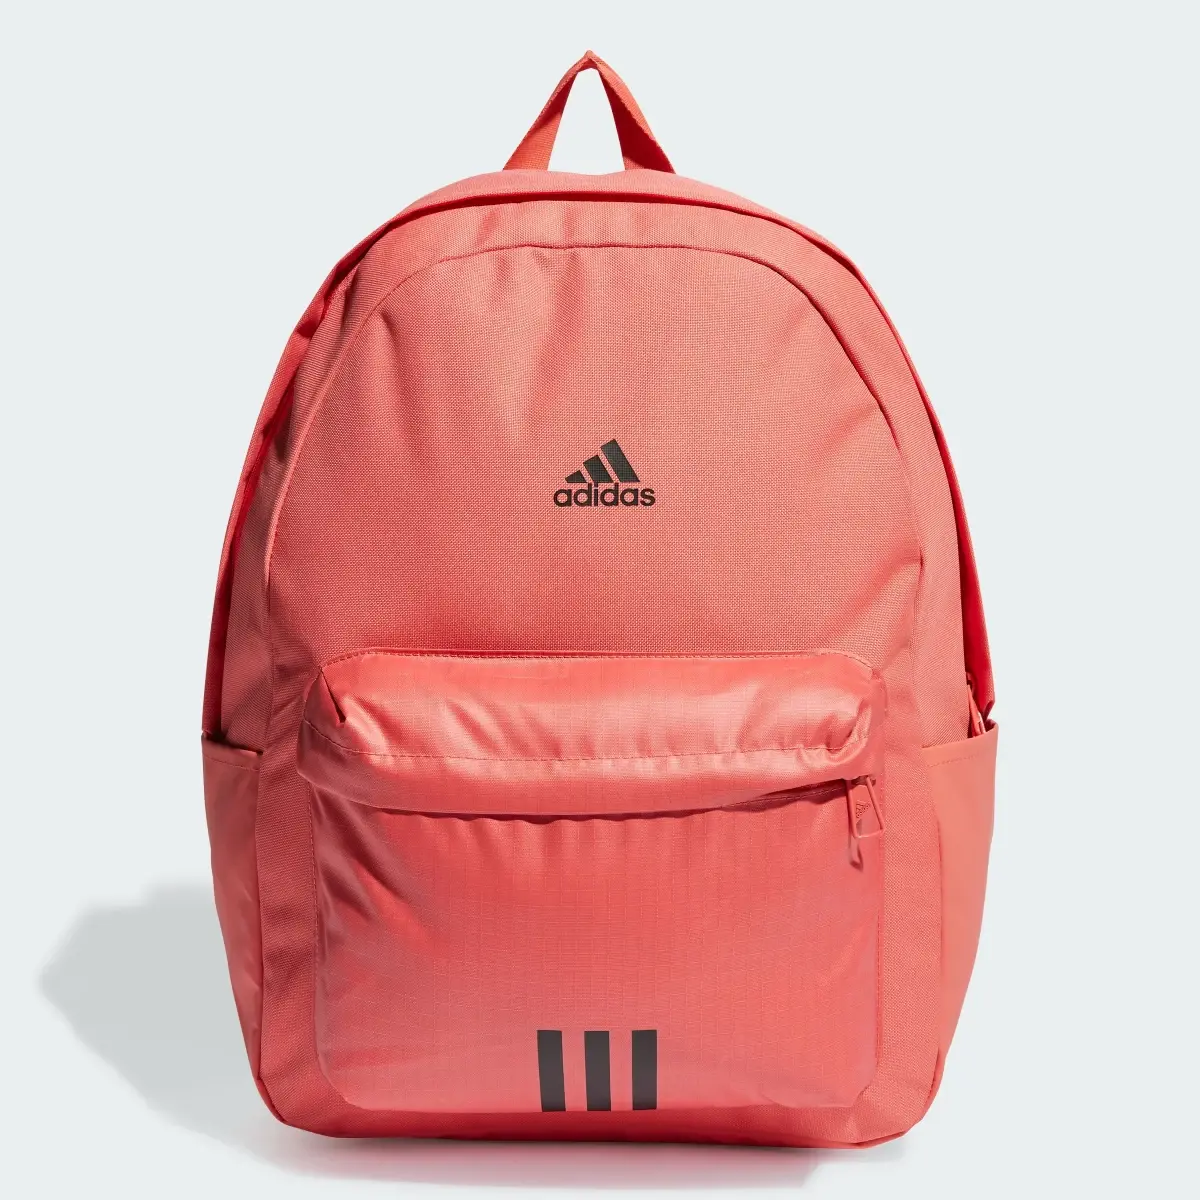 Adidas Classic Badge of Sport 3-Stripes Backpack. 1